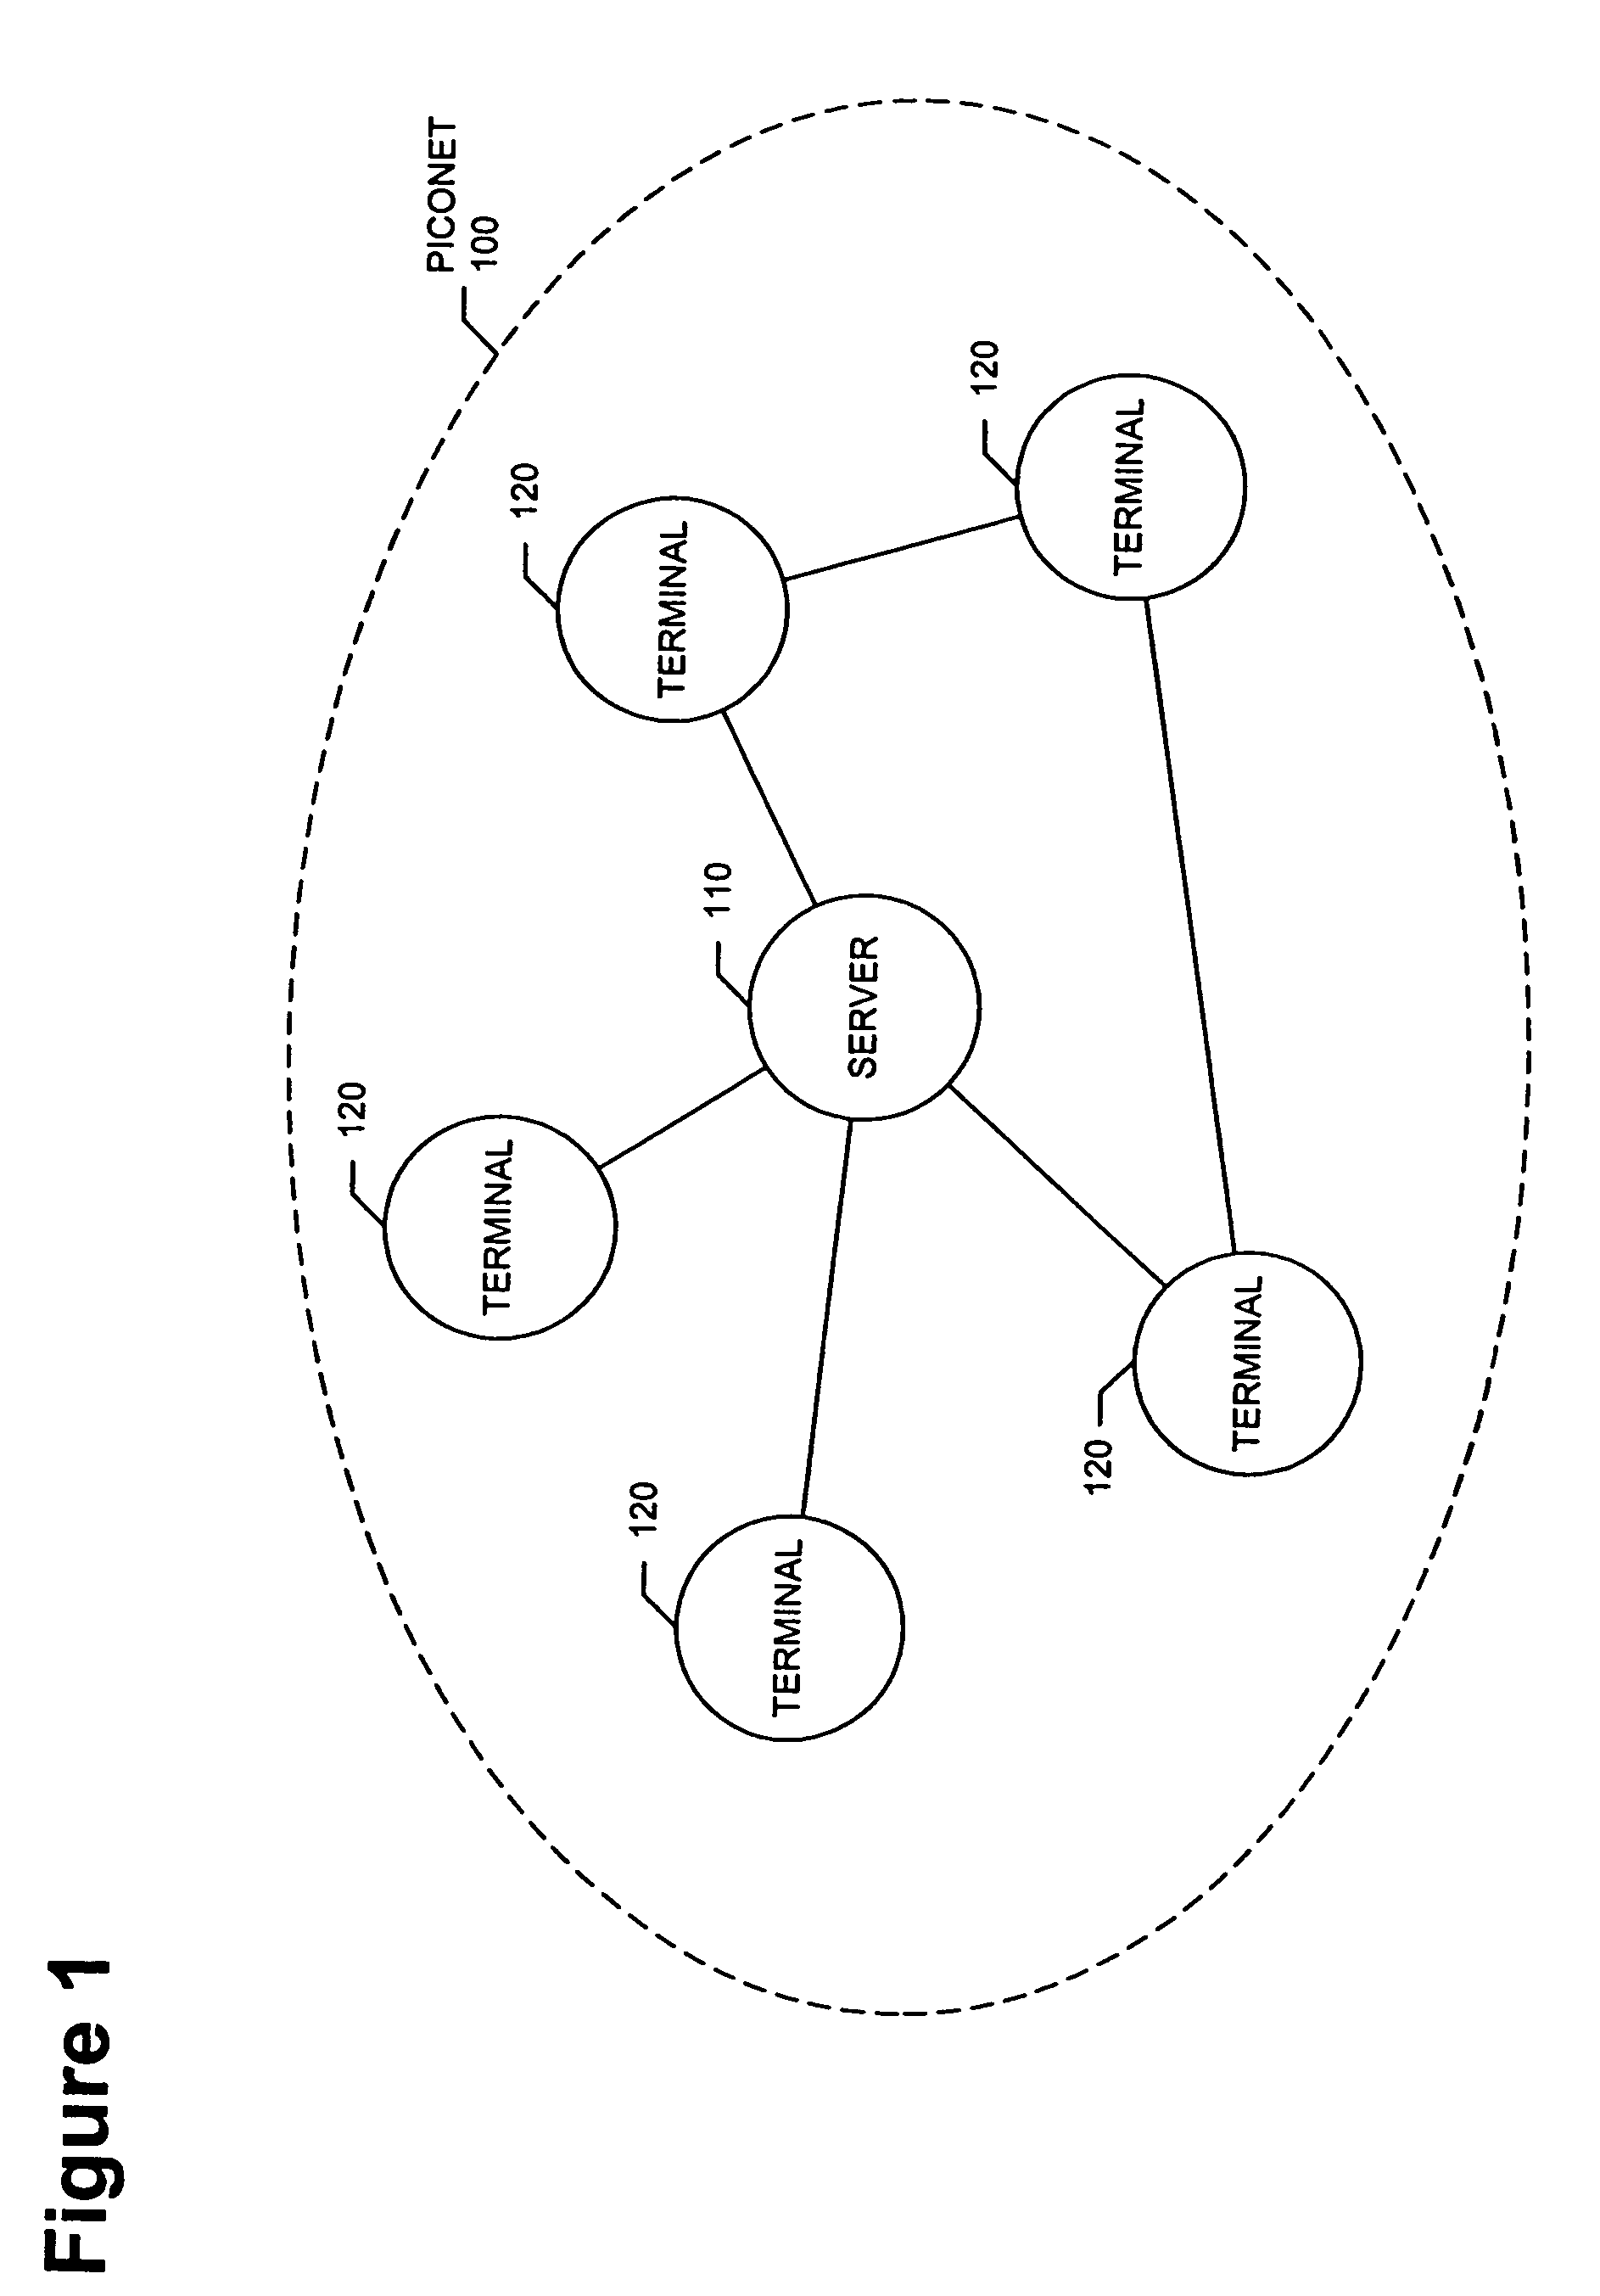 Device detection and service discovery system and method for a mobile ad hoc communications network